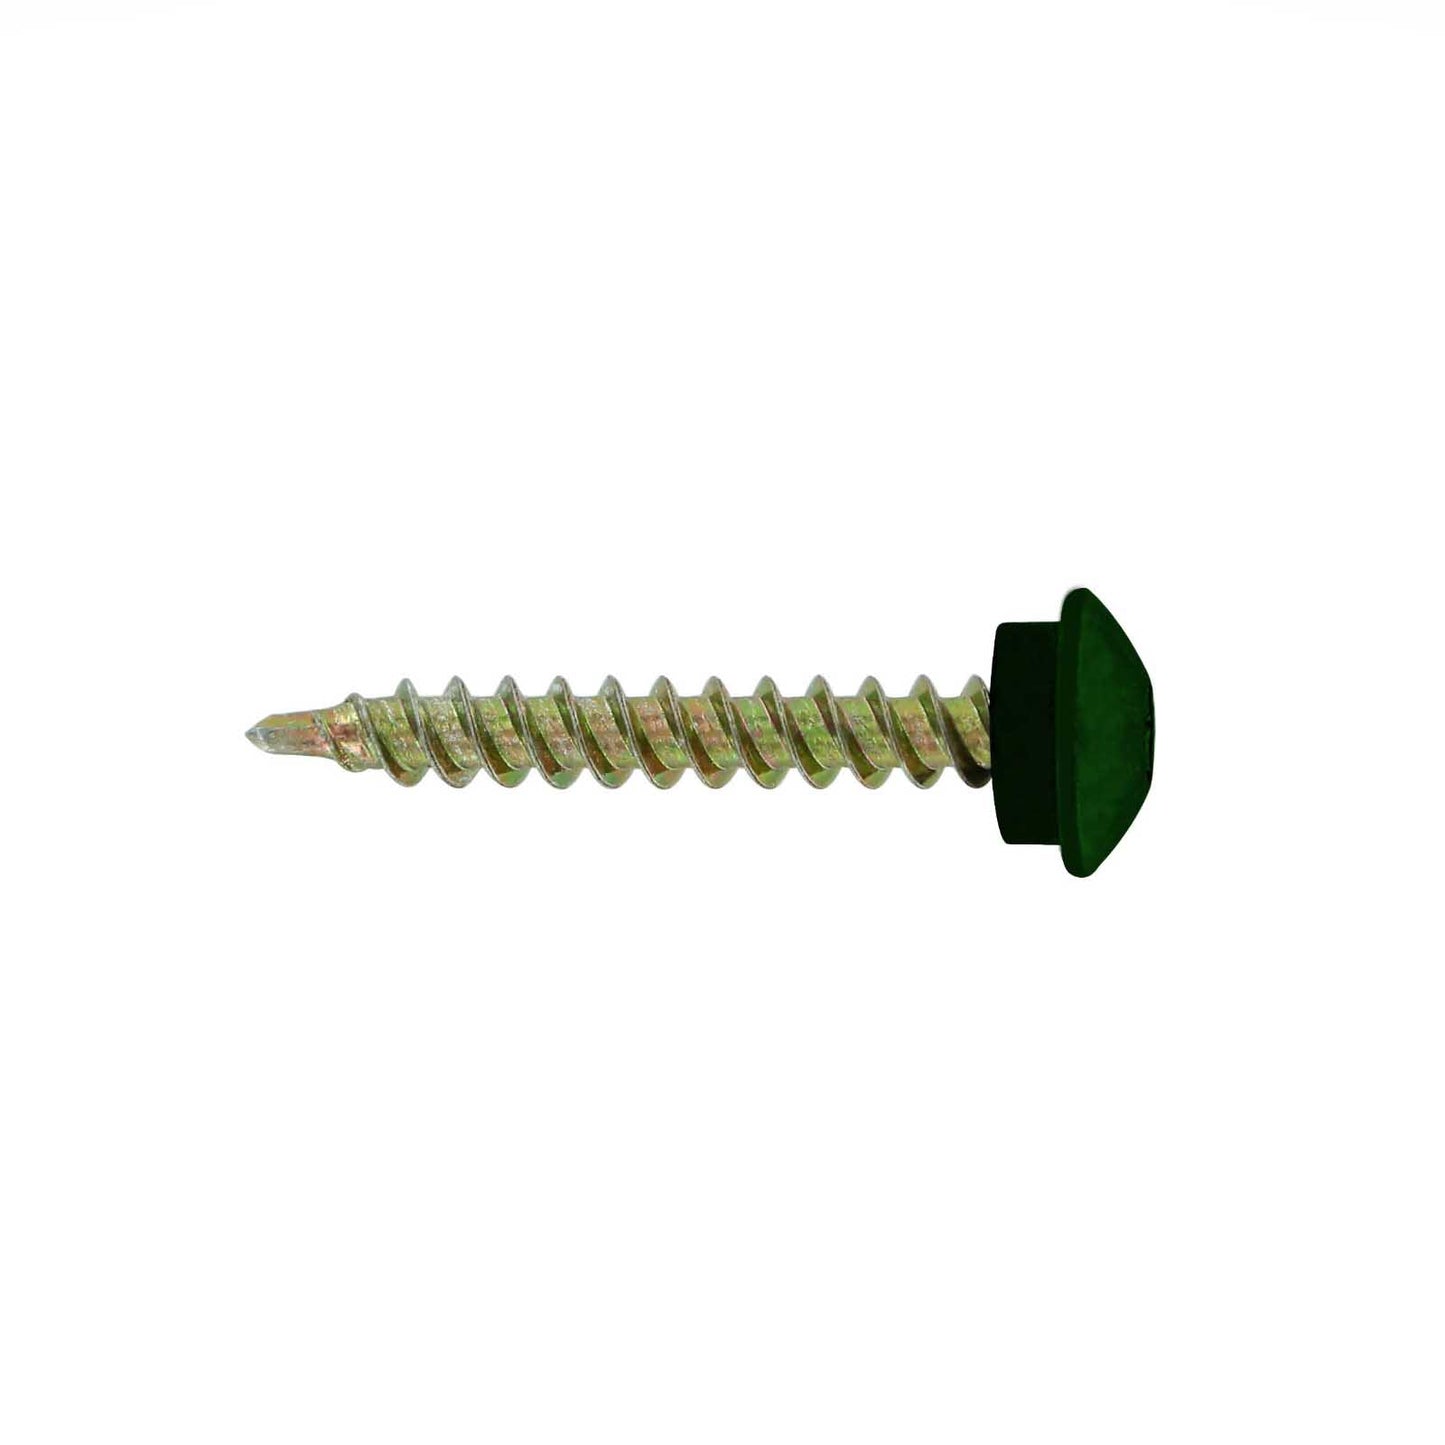 #10 x 112 inch Eclipse Woodbinder Metal Roofing Screw Forest Green Pkg 250